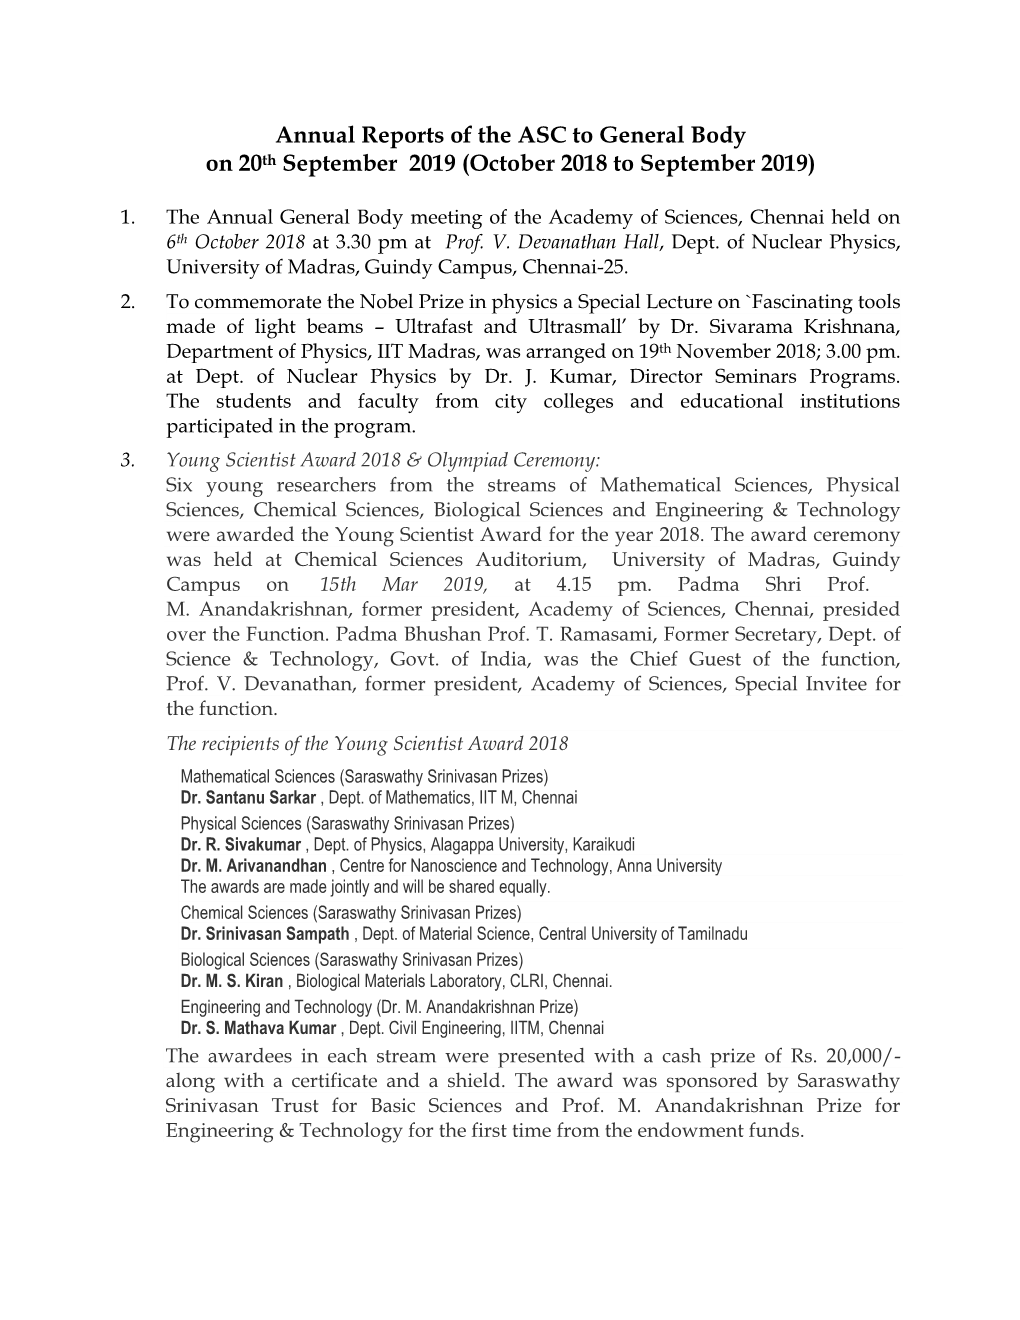 Annual Reports of the ASC to General Body on 20Th September 2019 (October 2018 to September 2019)